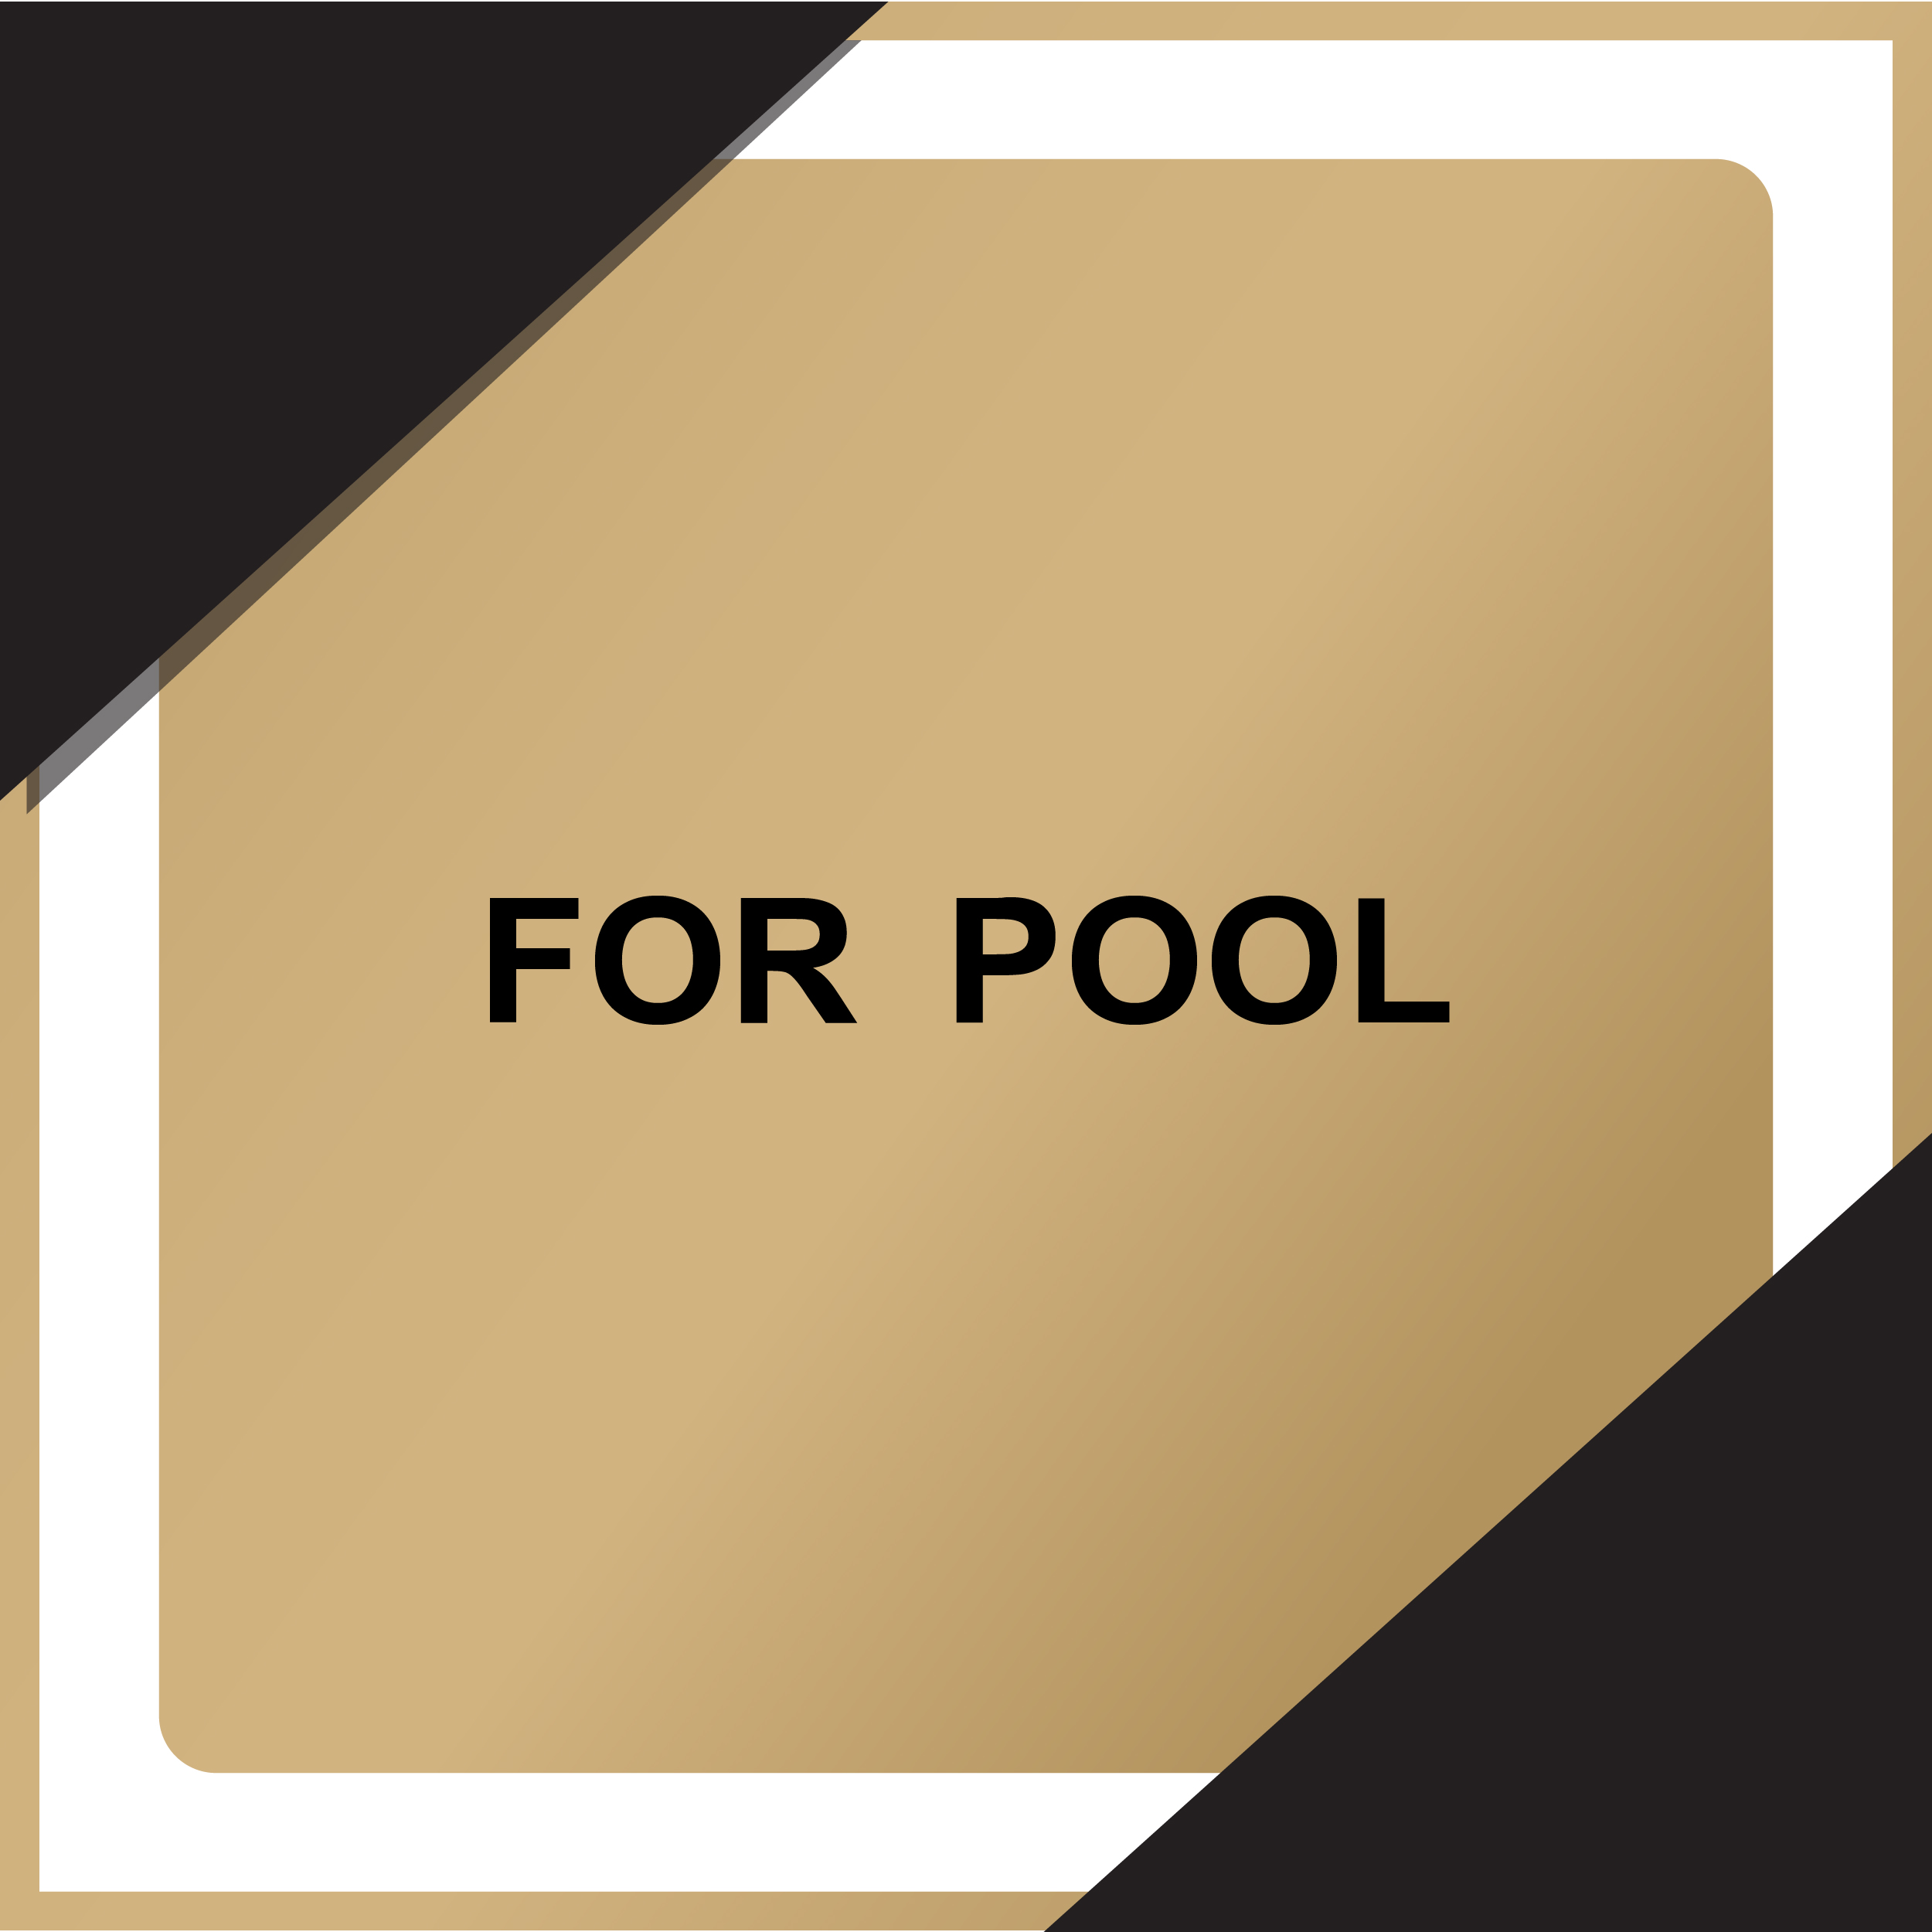 FOR POOL